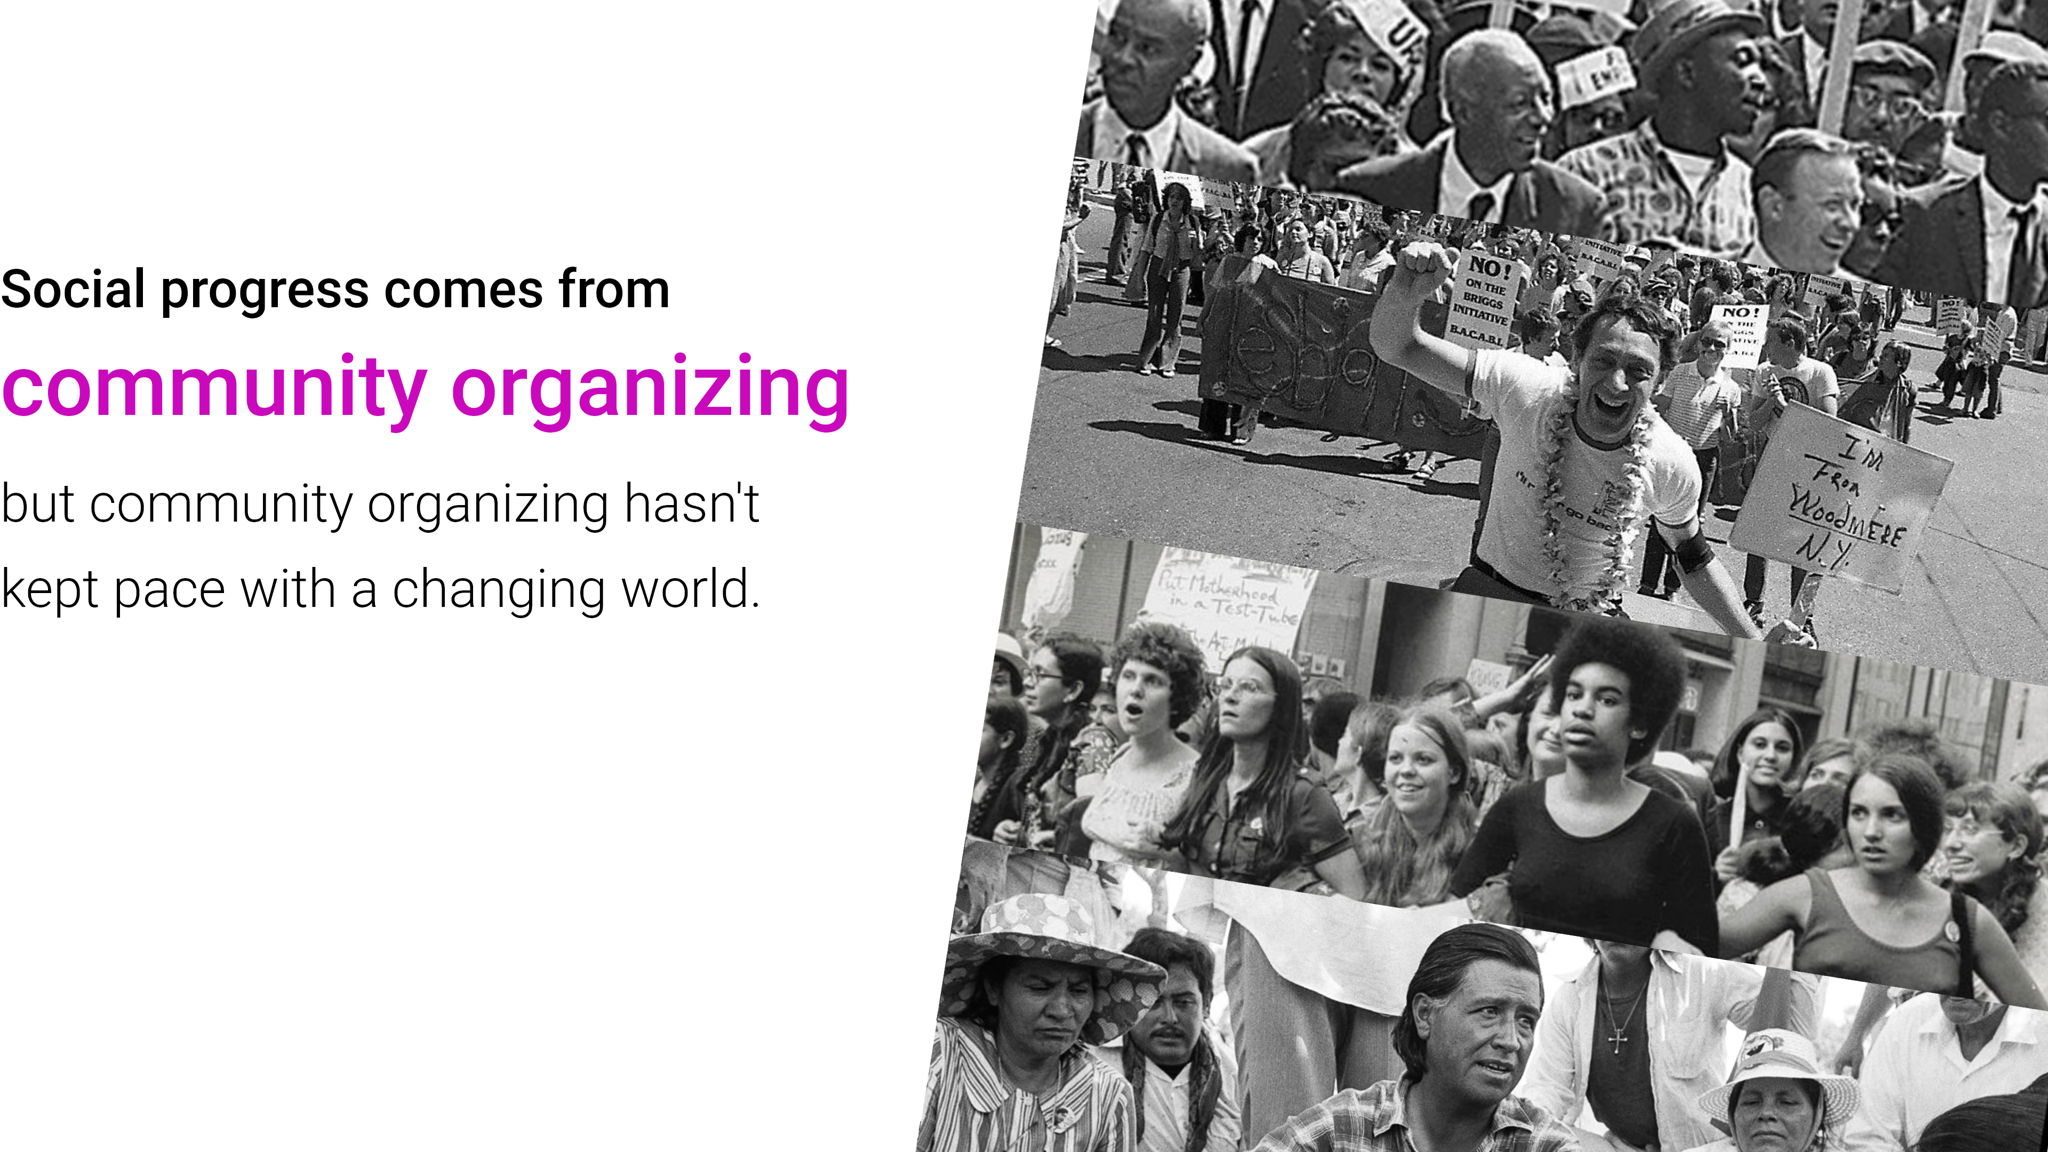 Social progress comes from community organizing but community organizing hasn't kept pace with a changing world.